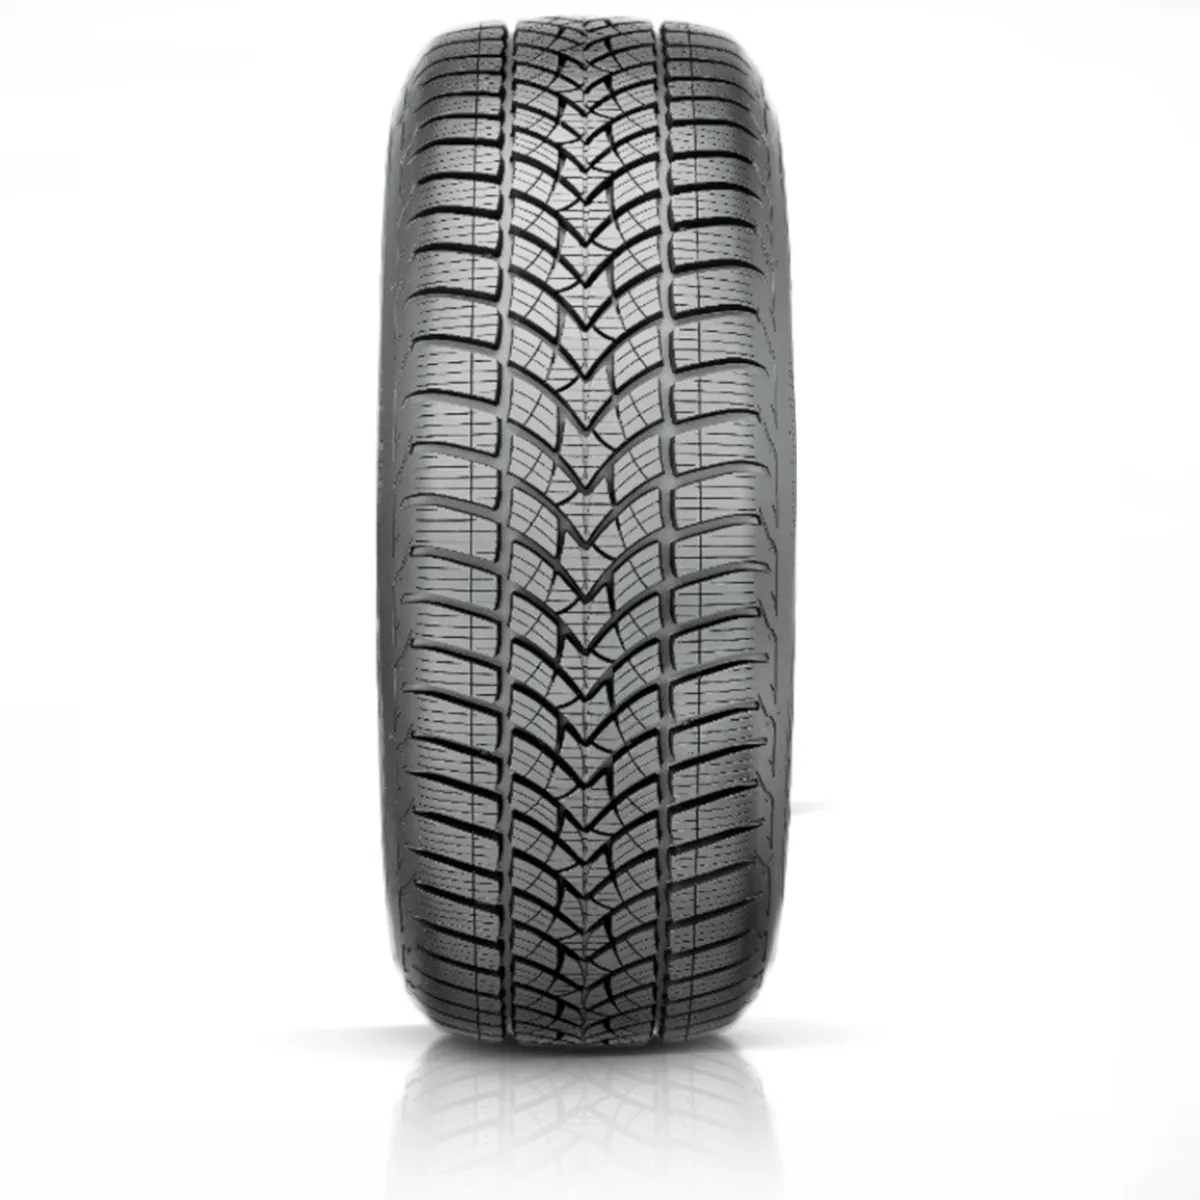 215/50R17 VOYAGER 95V WIN MS XL FP zim 